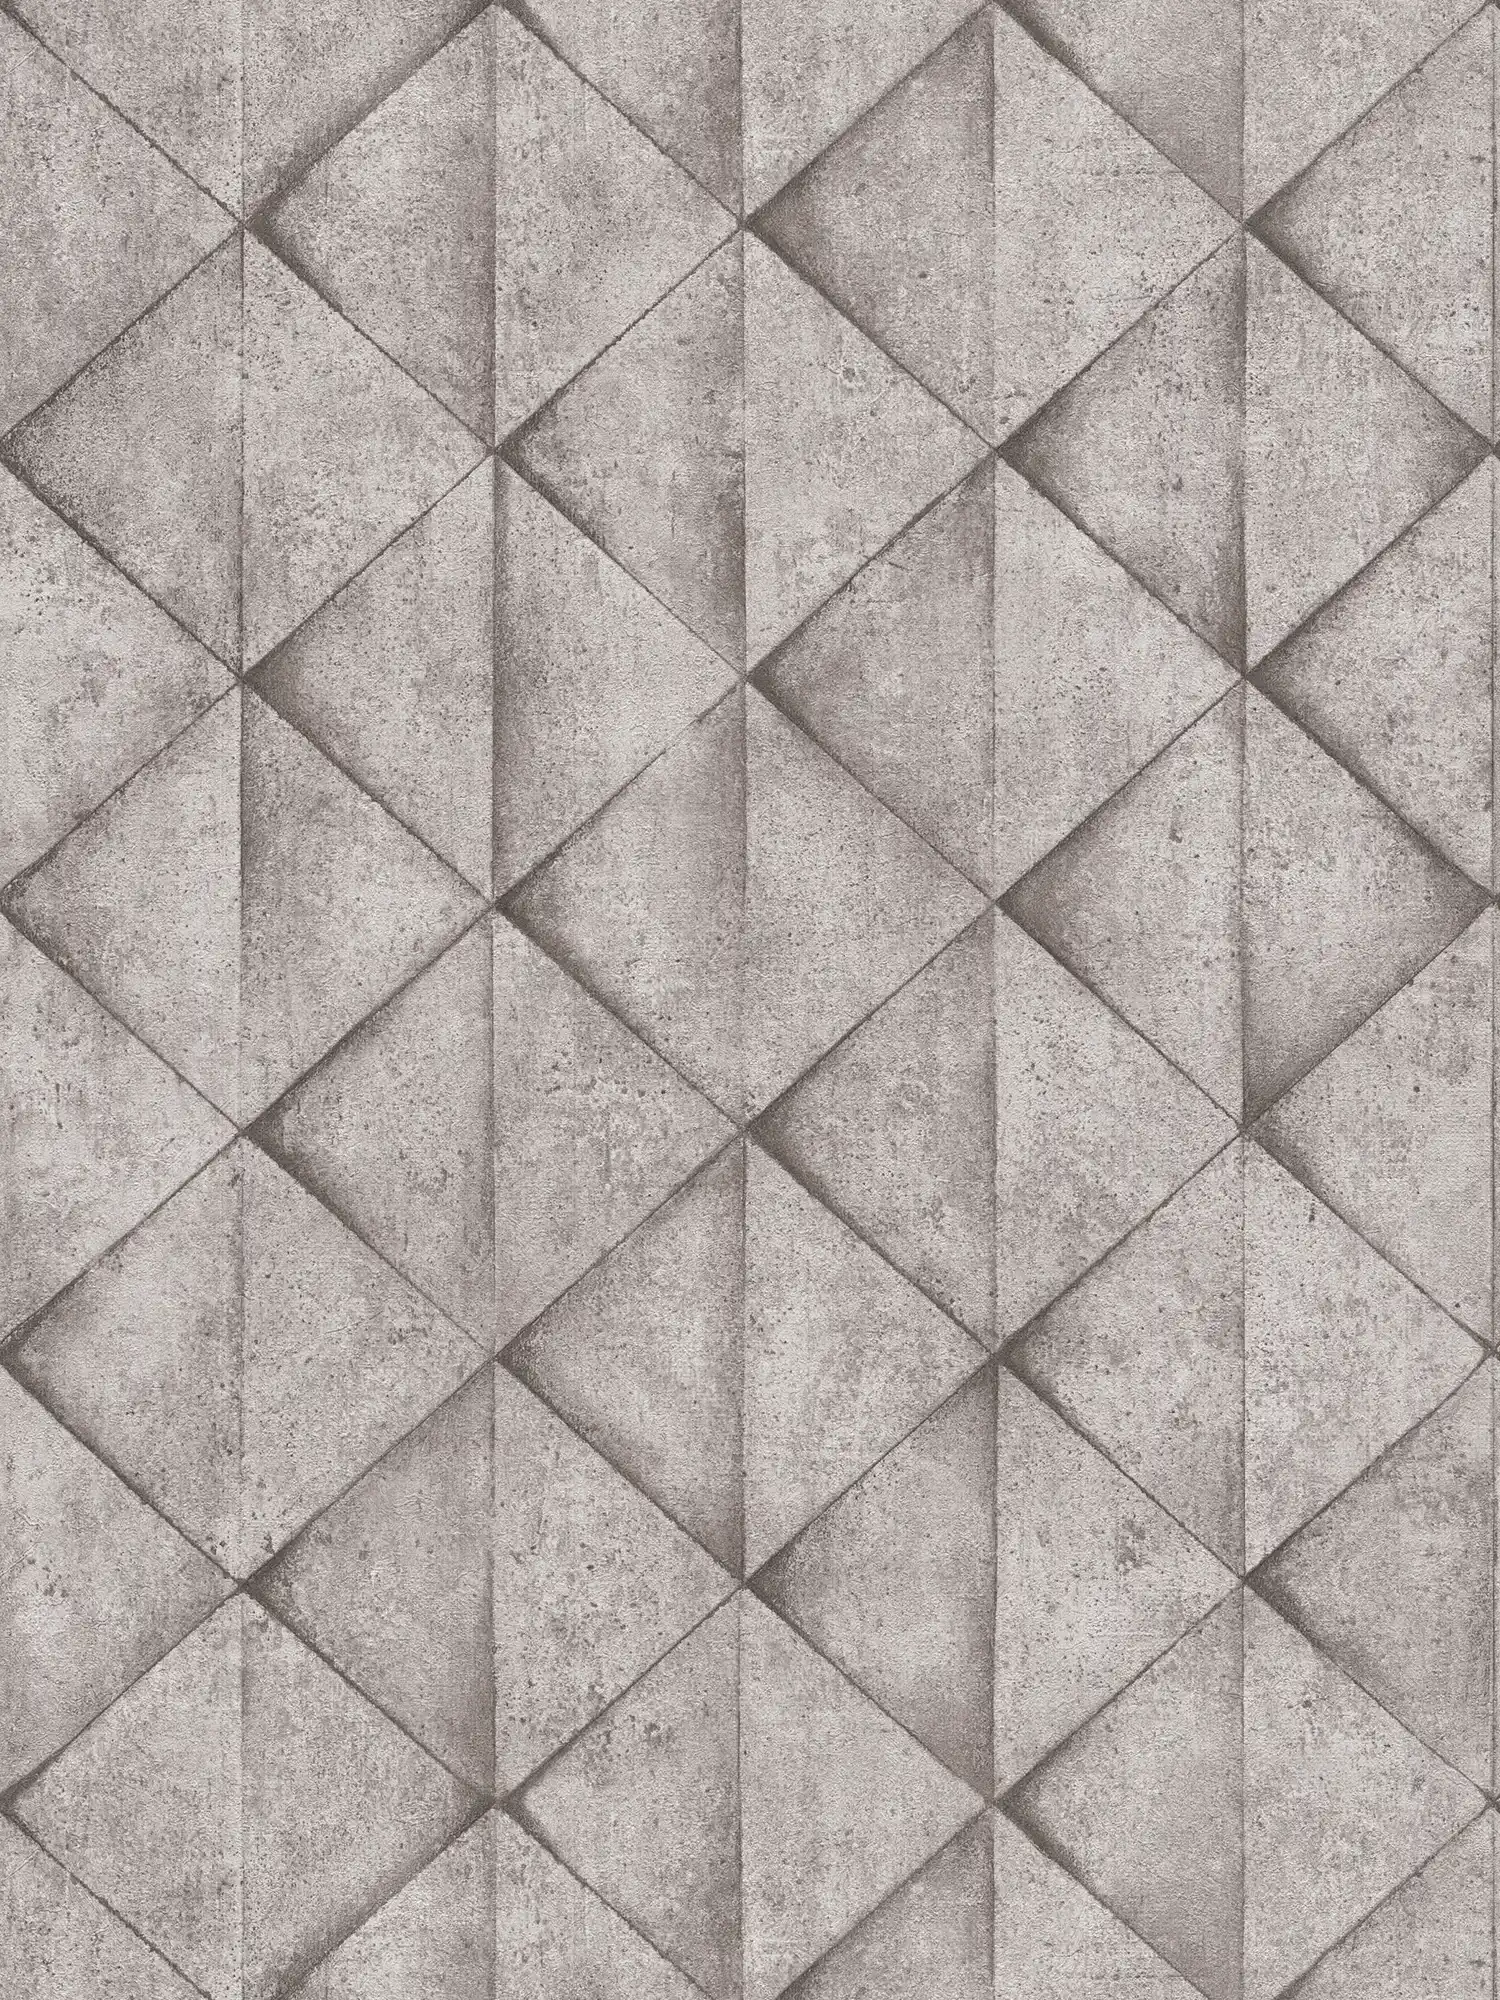 Wallpaper with concrete tiles & 3D effect - grey, anthracite
